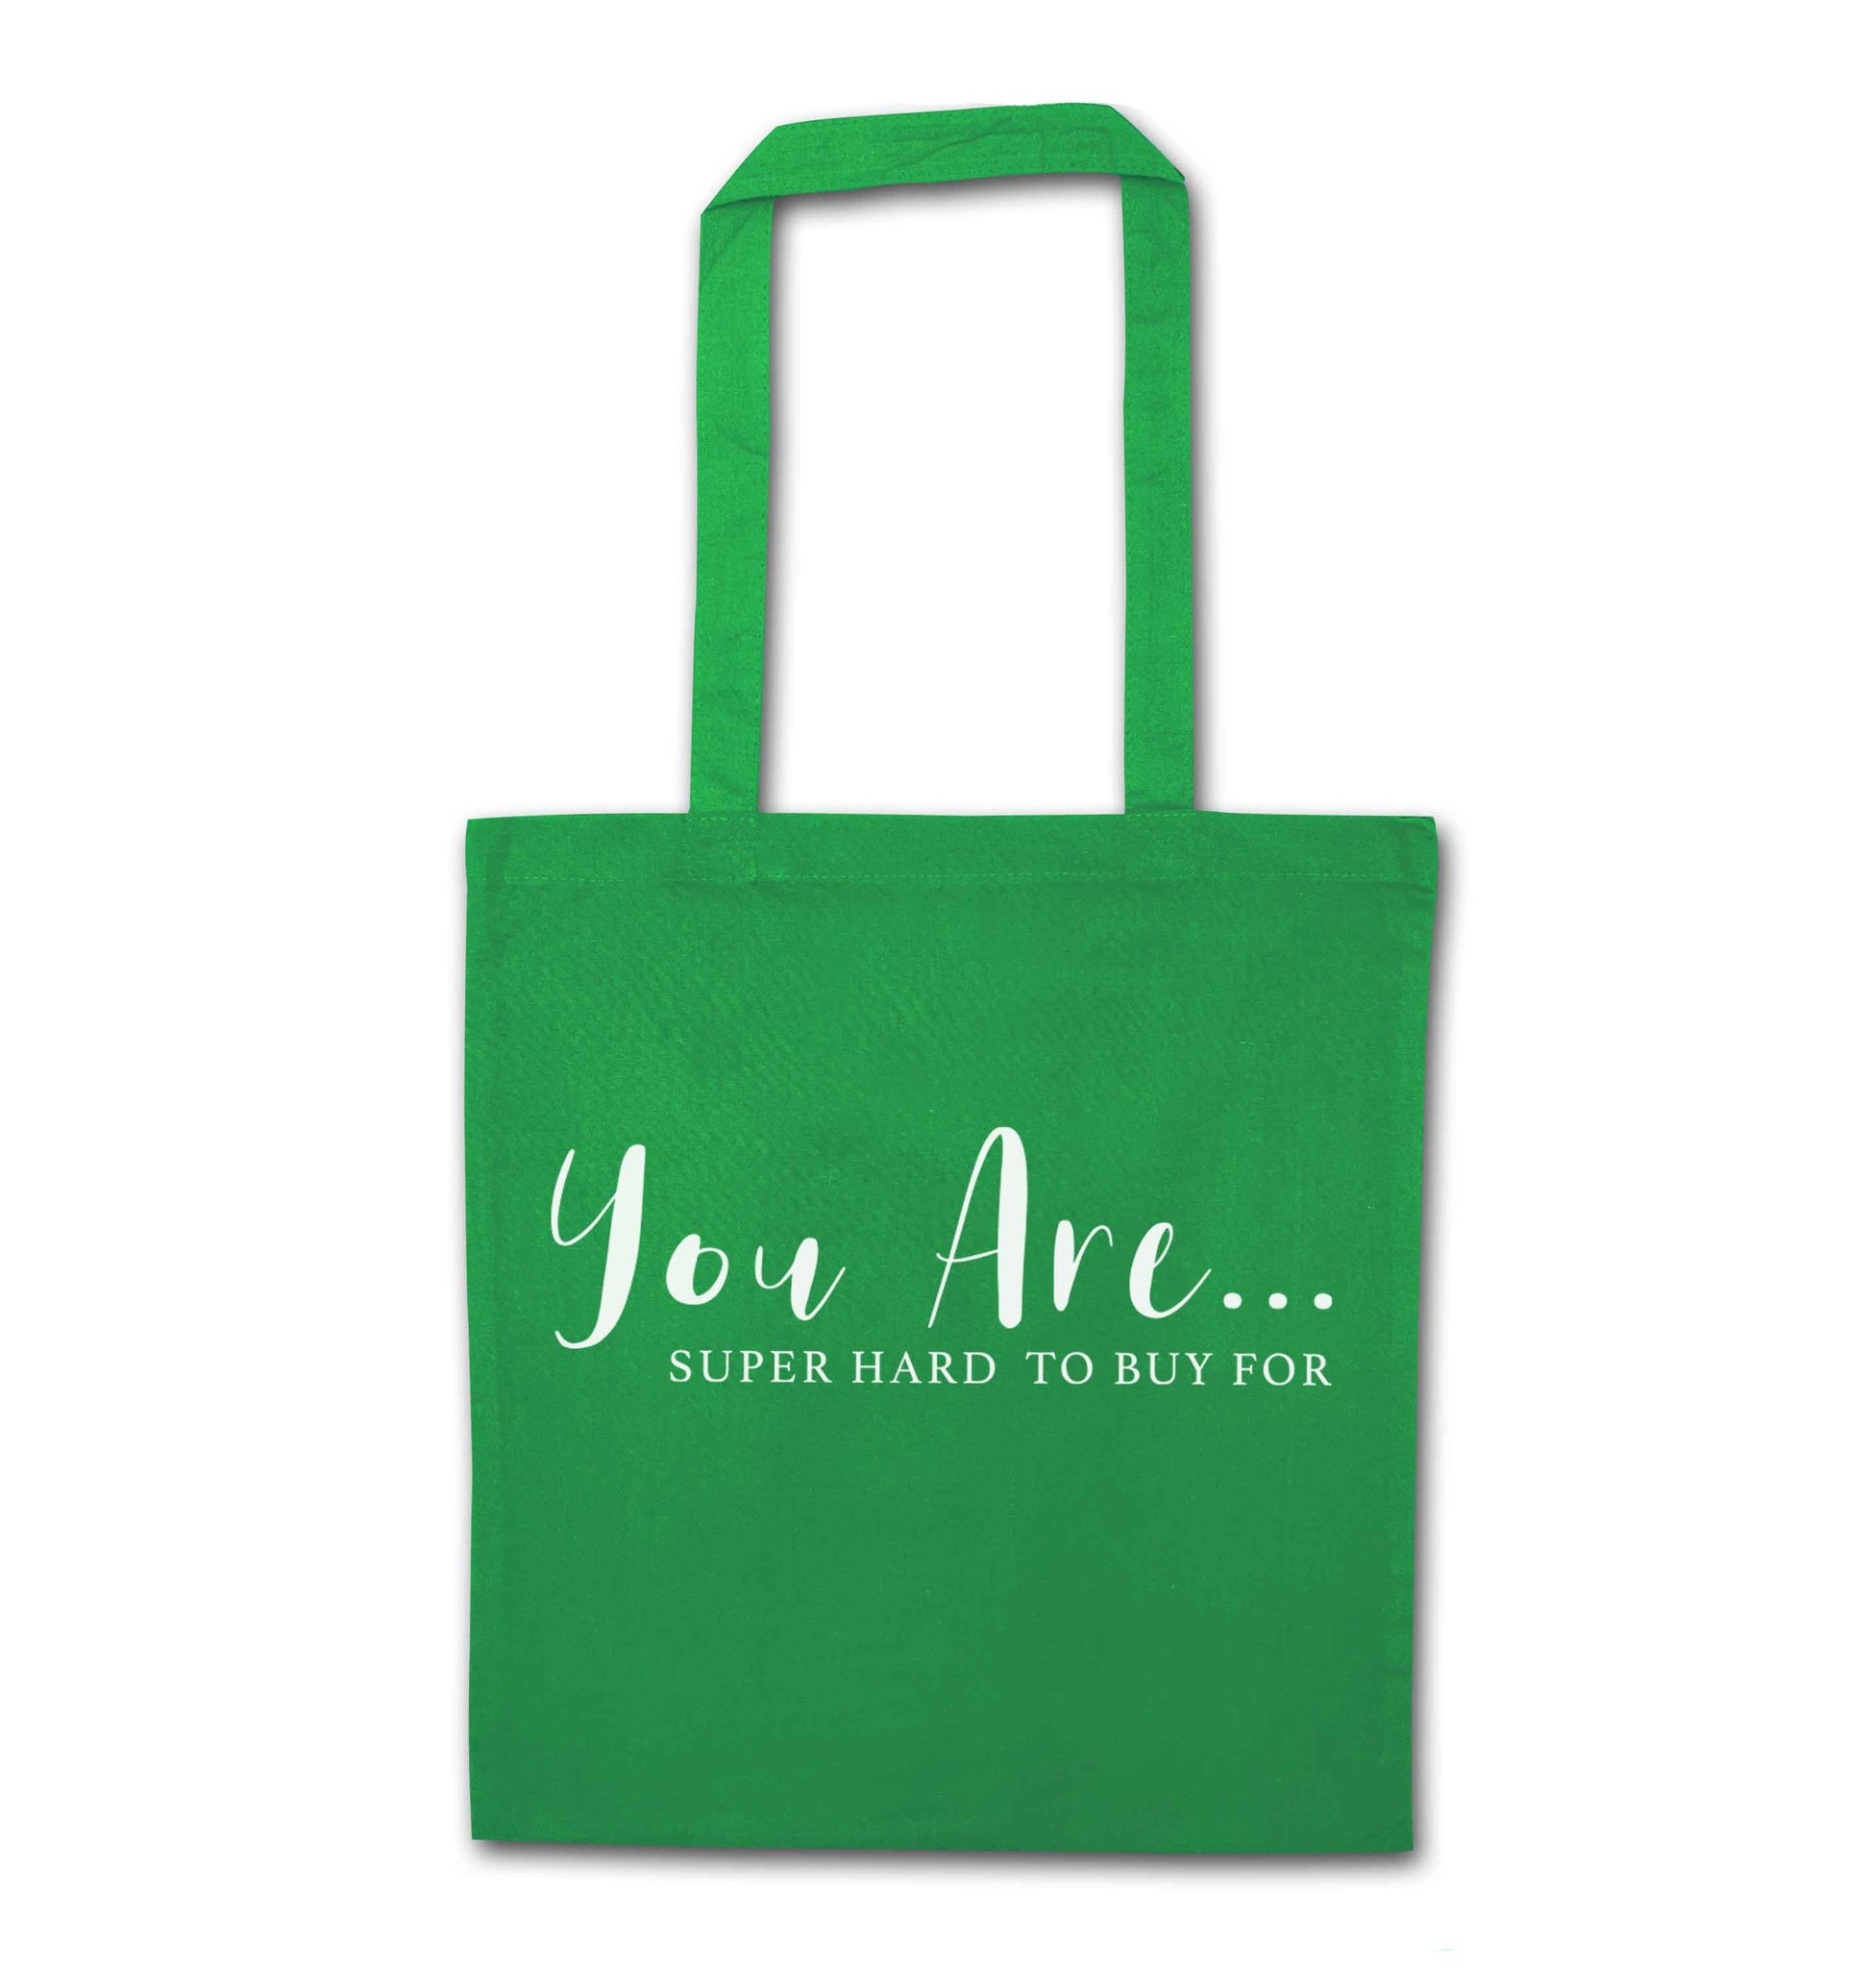 You are super hard to buy for green tote bag